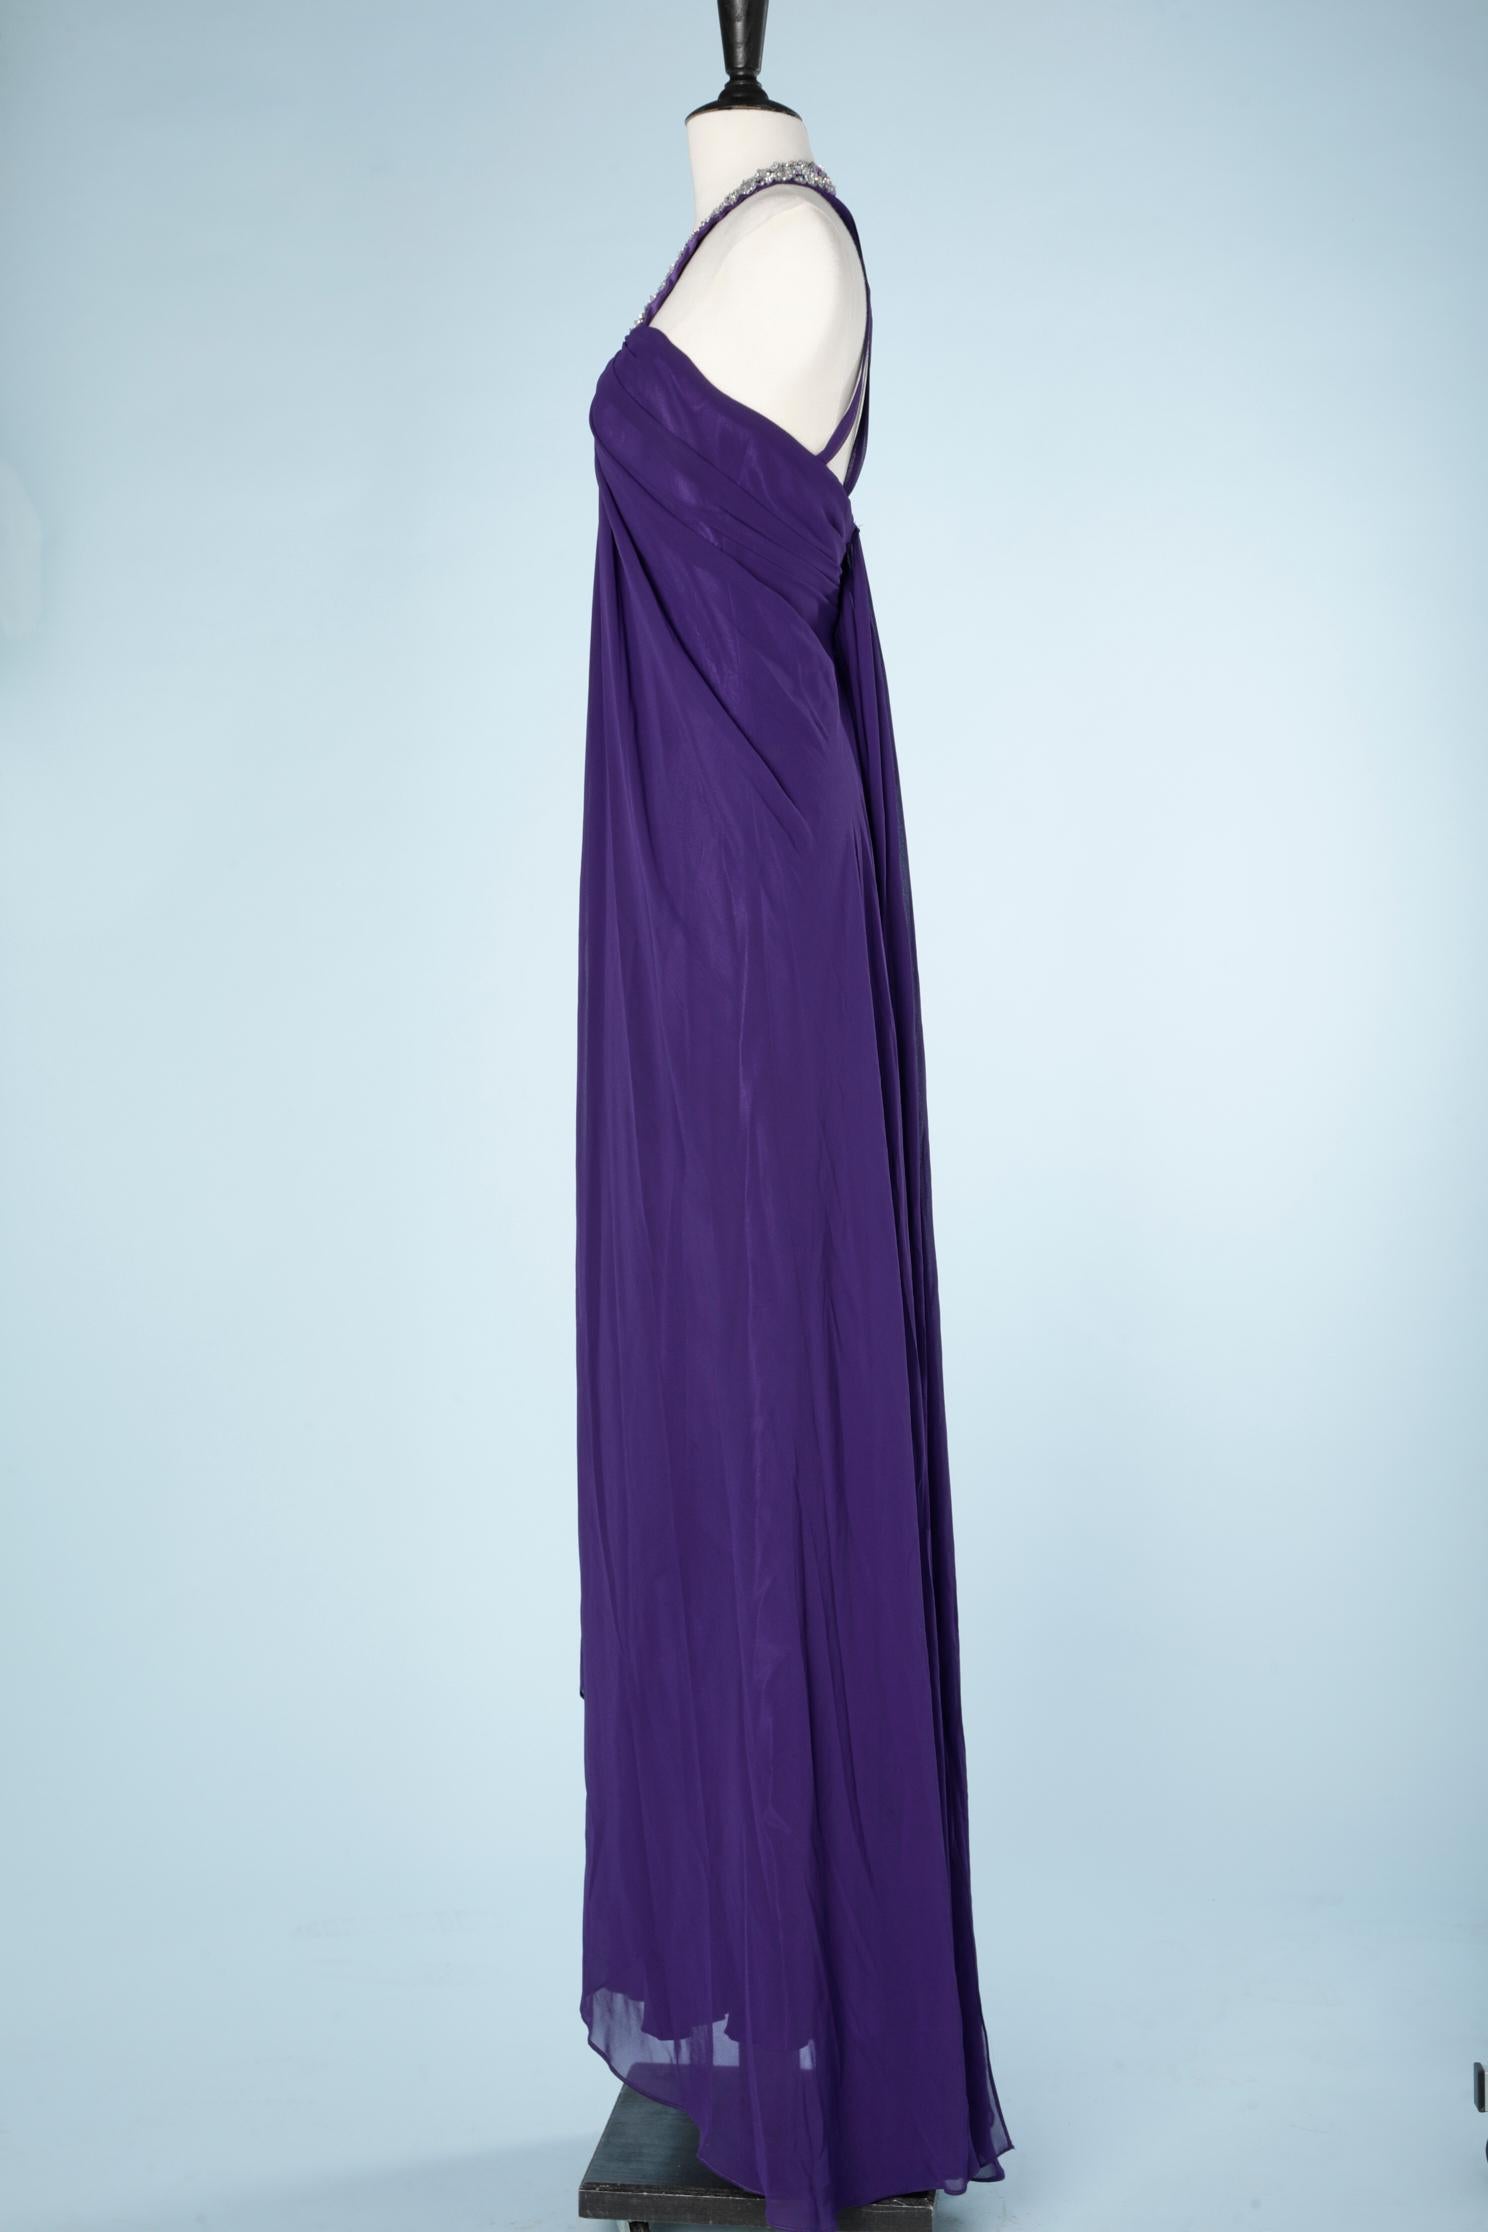 Purple Long evening gown in purple chiffon and satin with a sequin neckless collar For Sale